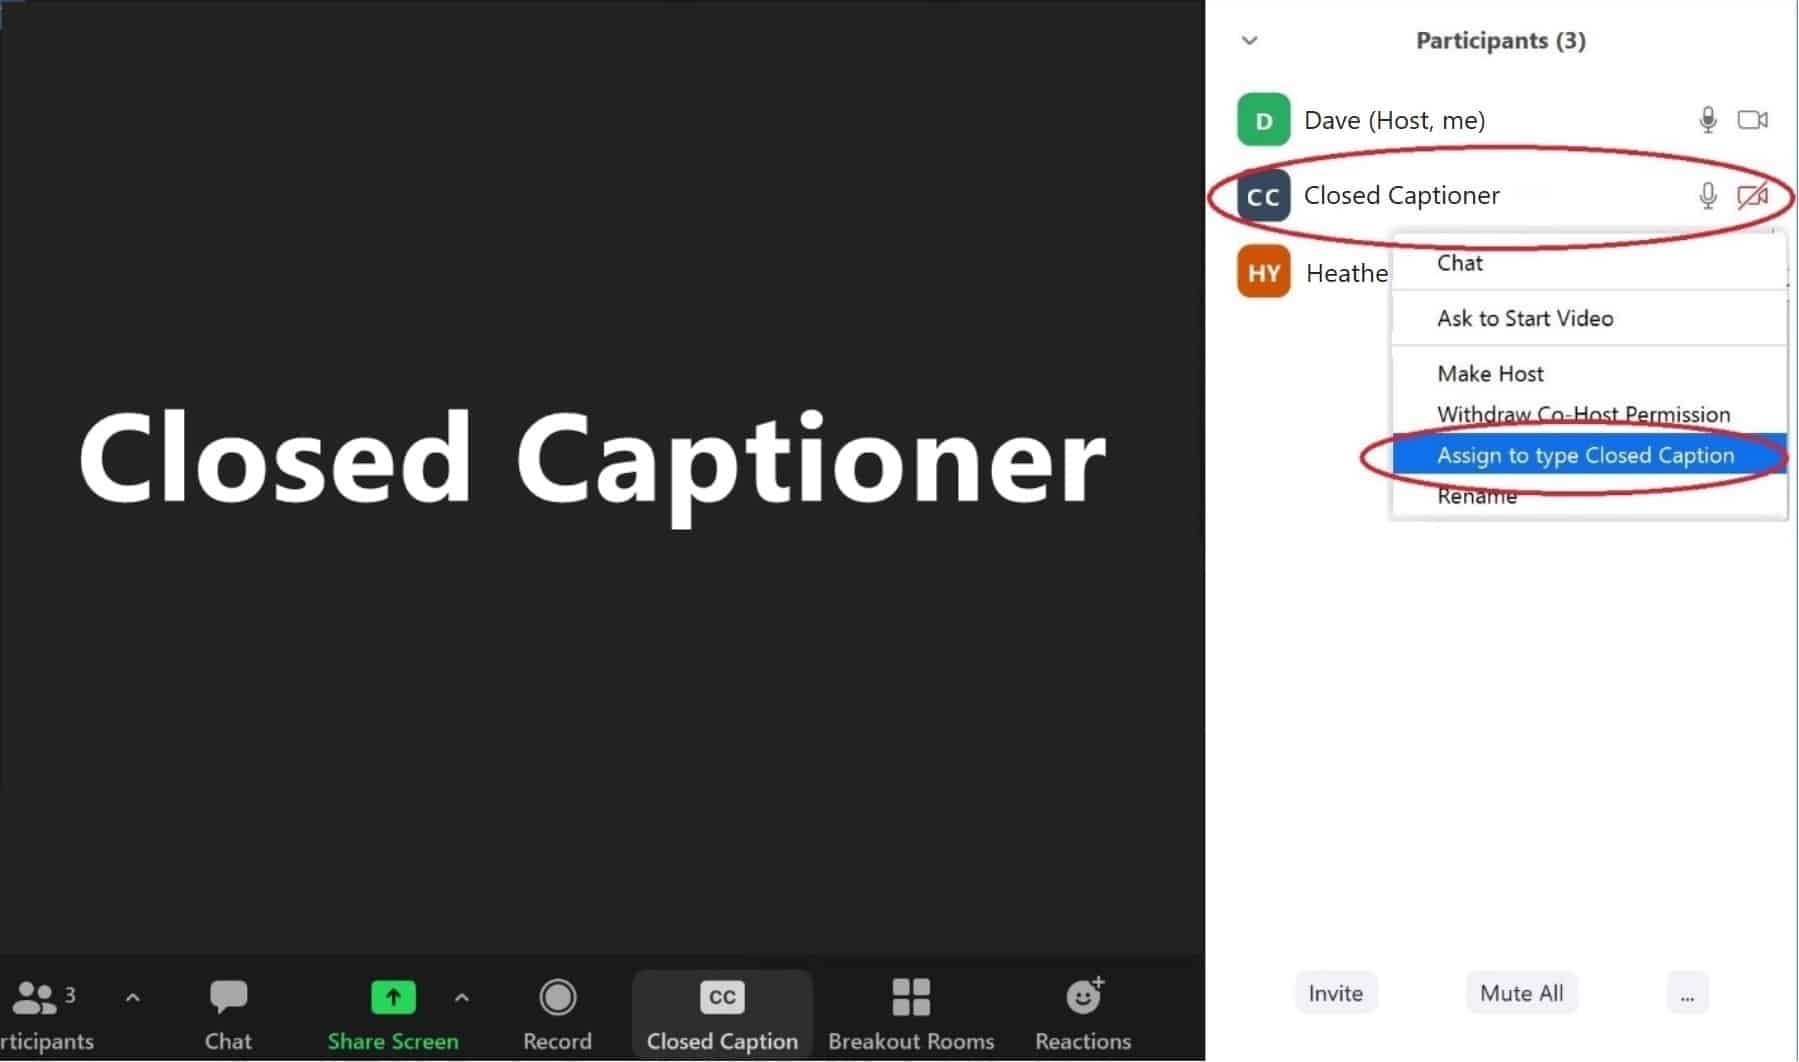 Zoom Screenshot showing VITAC's Closed Captioner is available